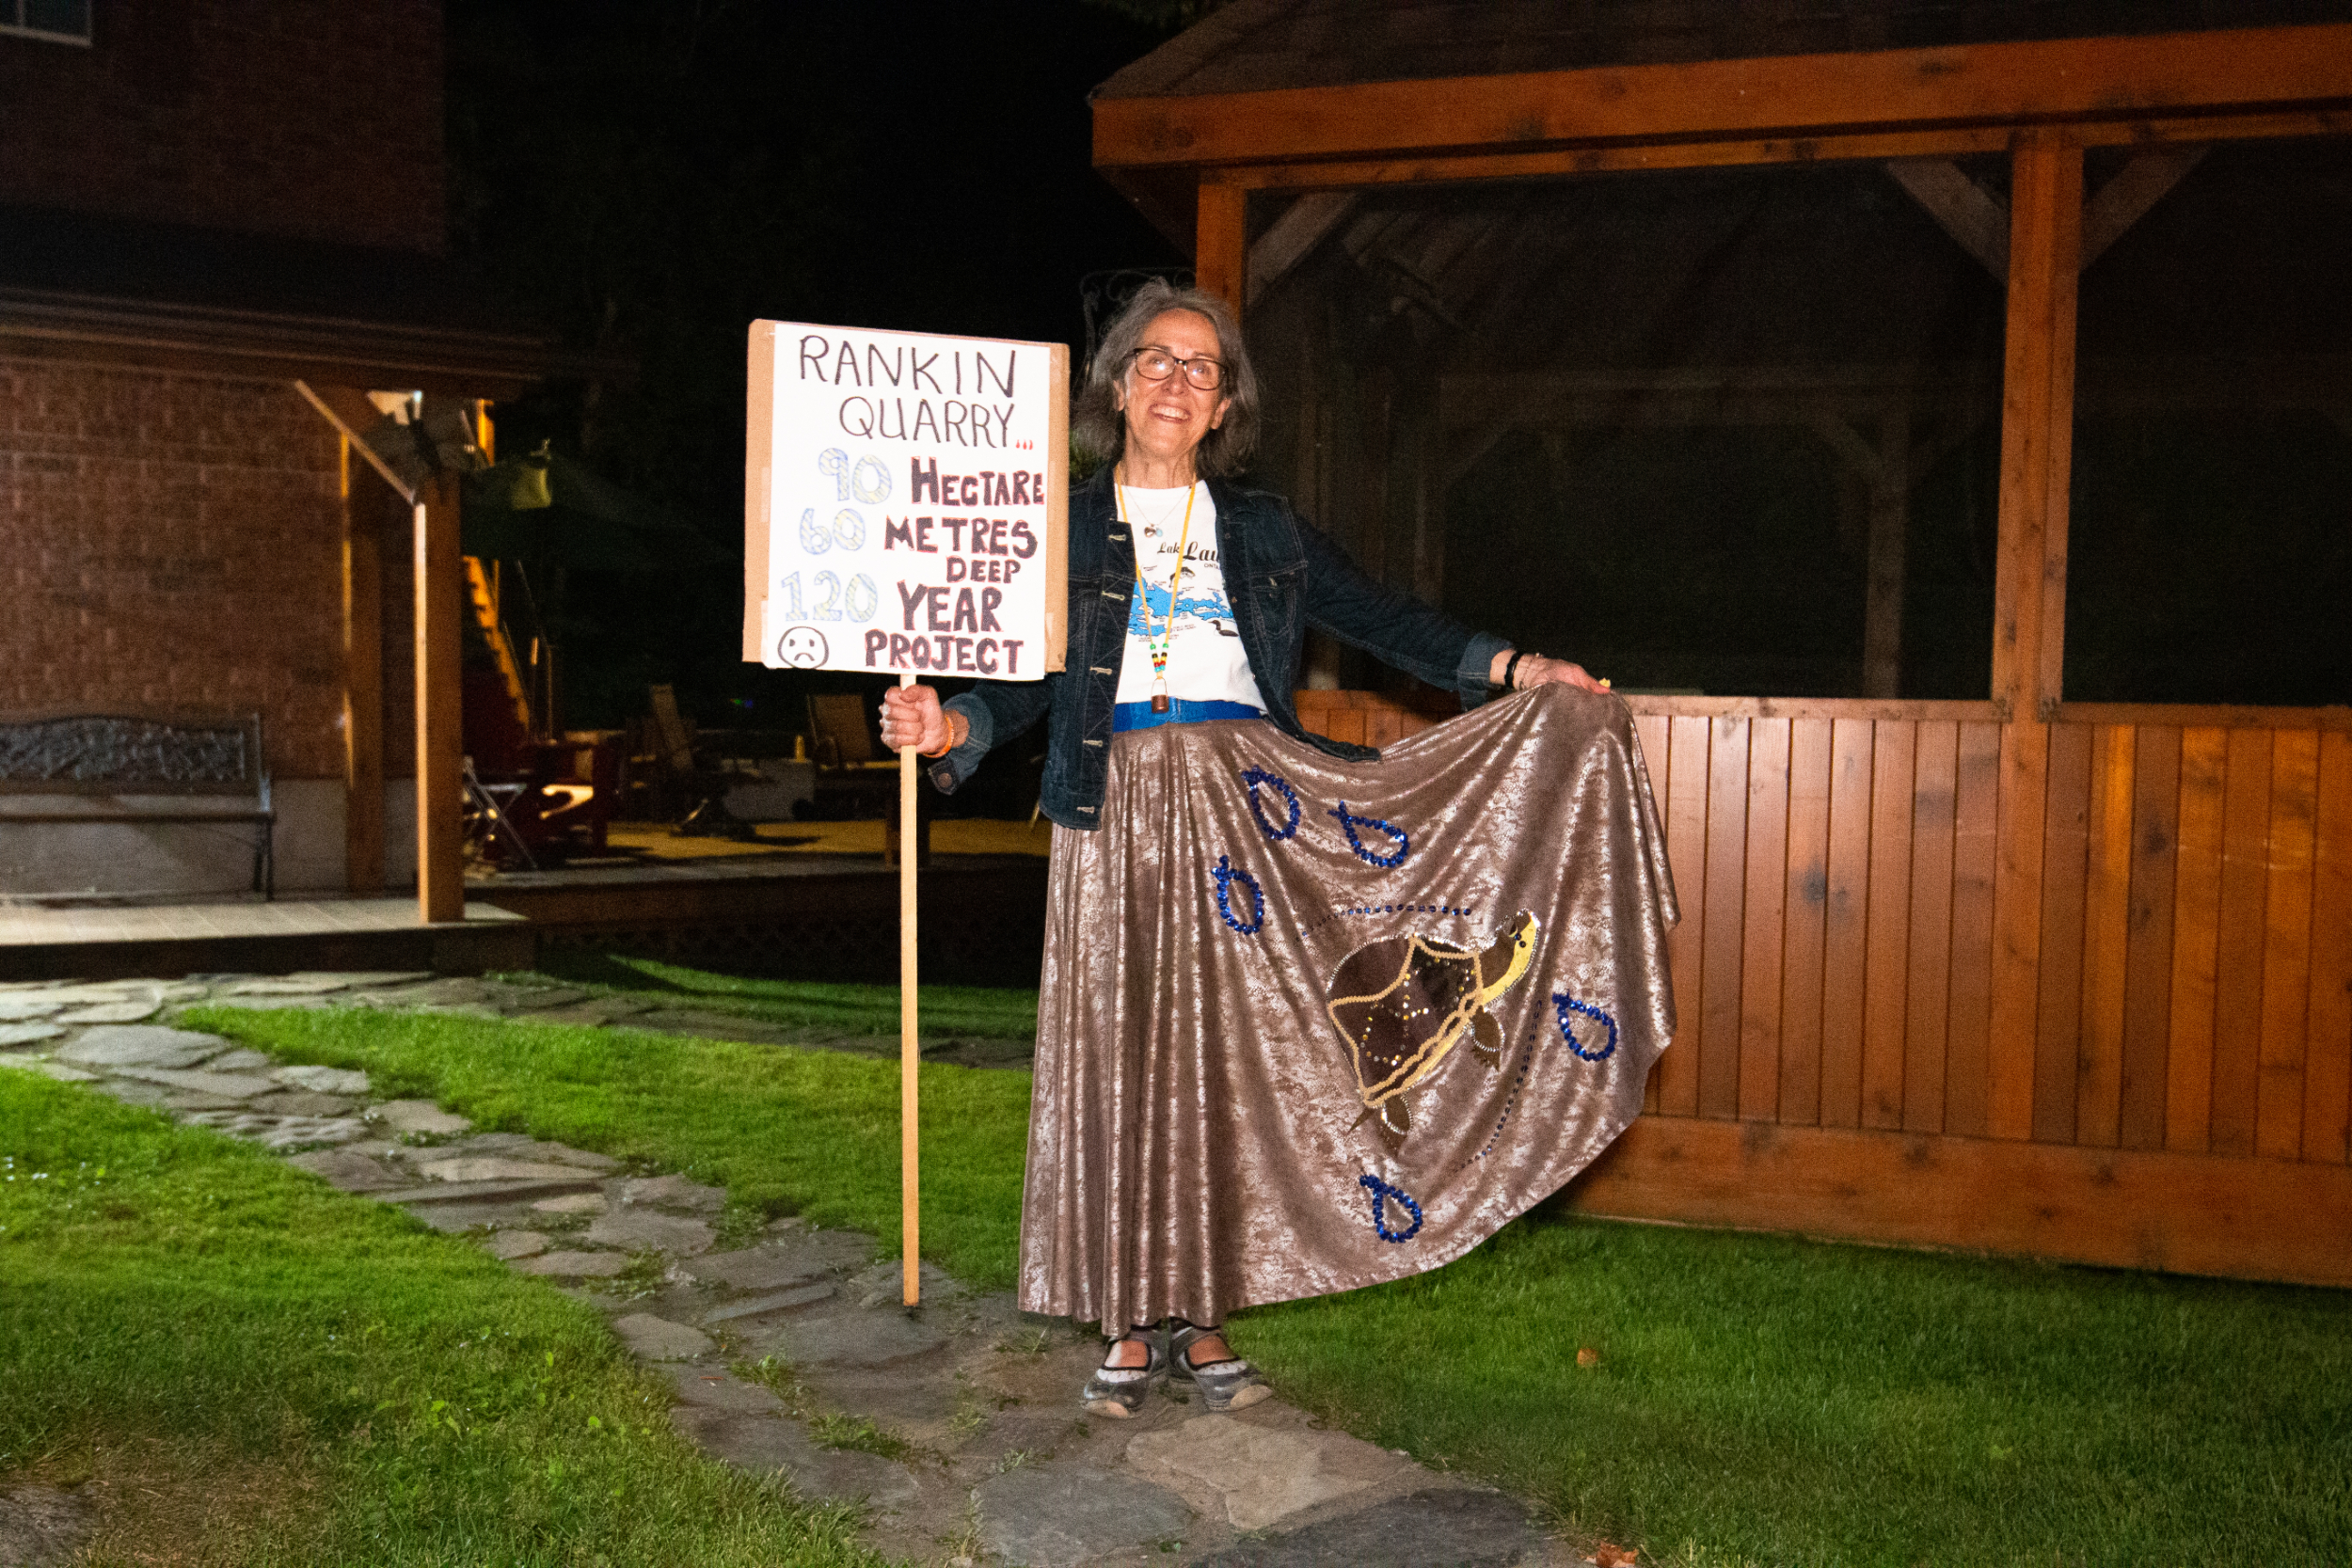 Janice Gamble, wearing a turtle skirt, poses with a sign reading "Rankin quarry, 90 hgectares, 60 metres deep, 120 year project"